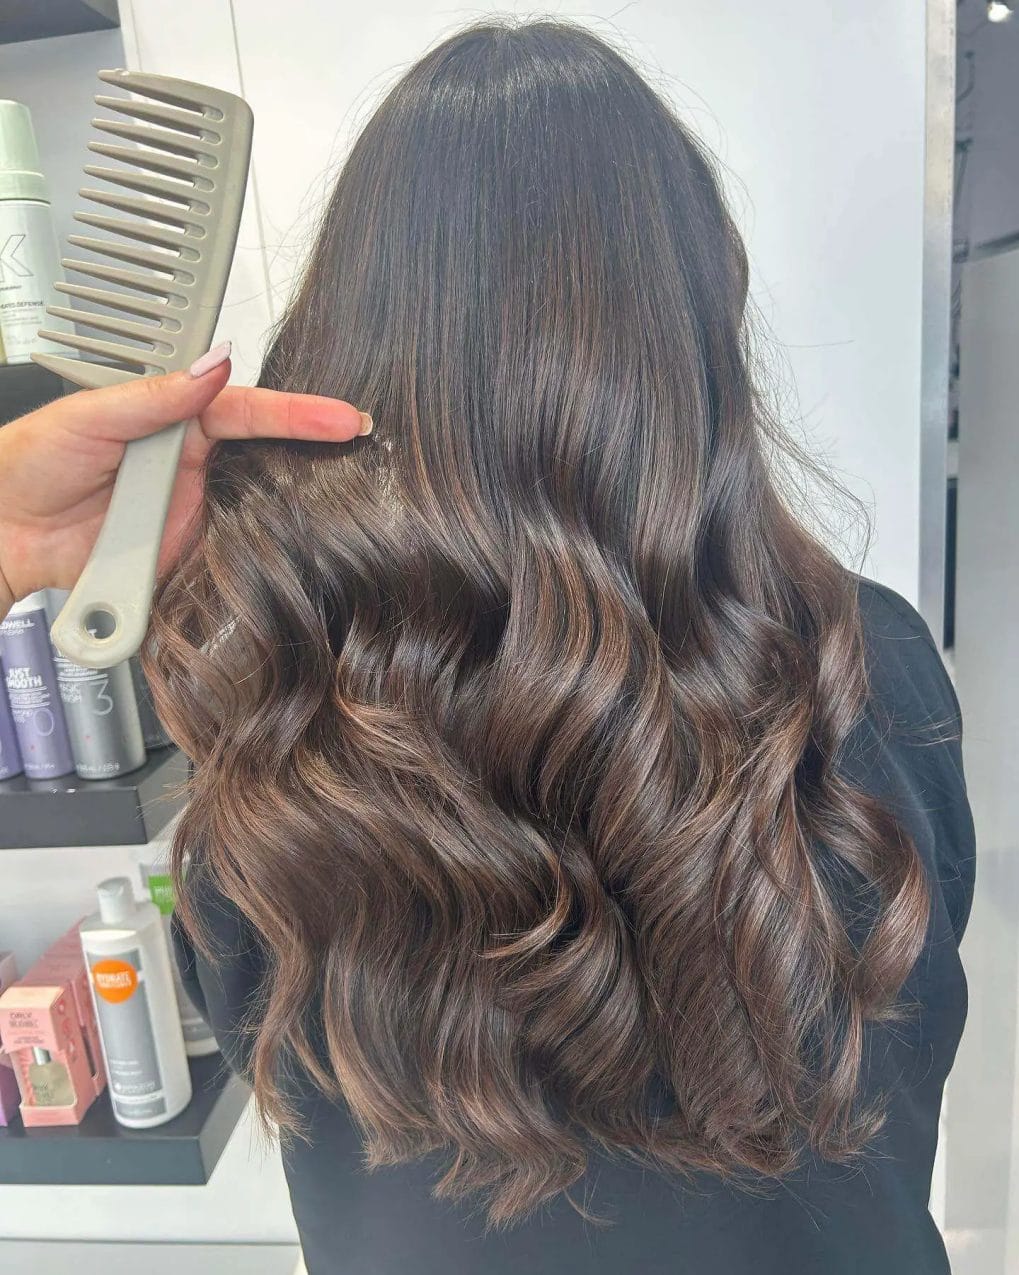 Dark chocolate base with soft mocha highlights, showcasing winter's classic balayage technique.